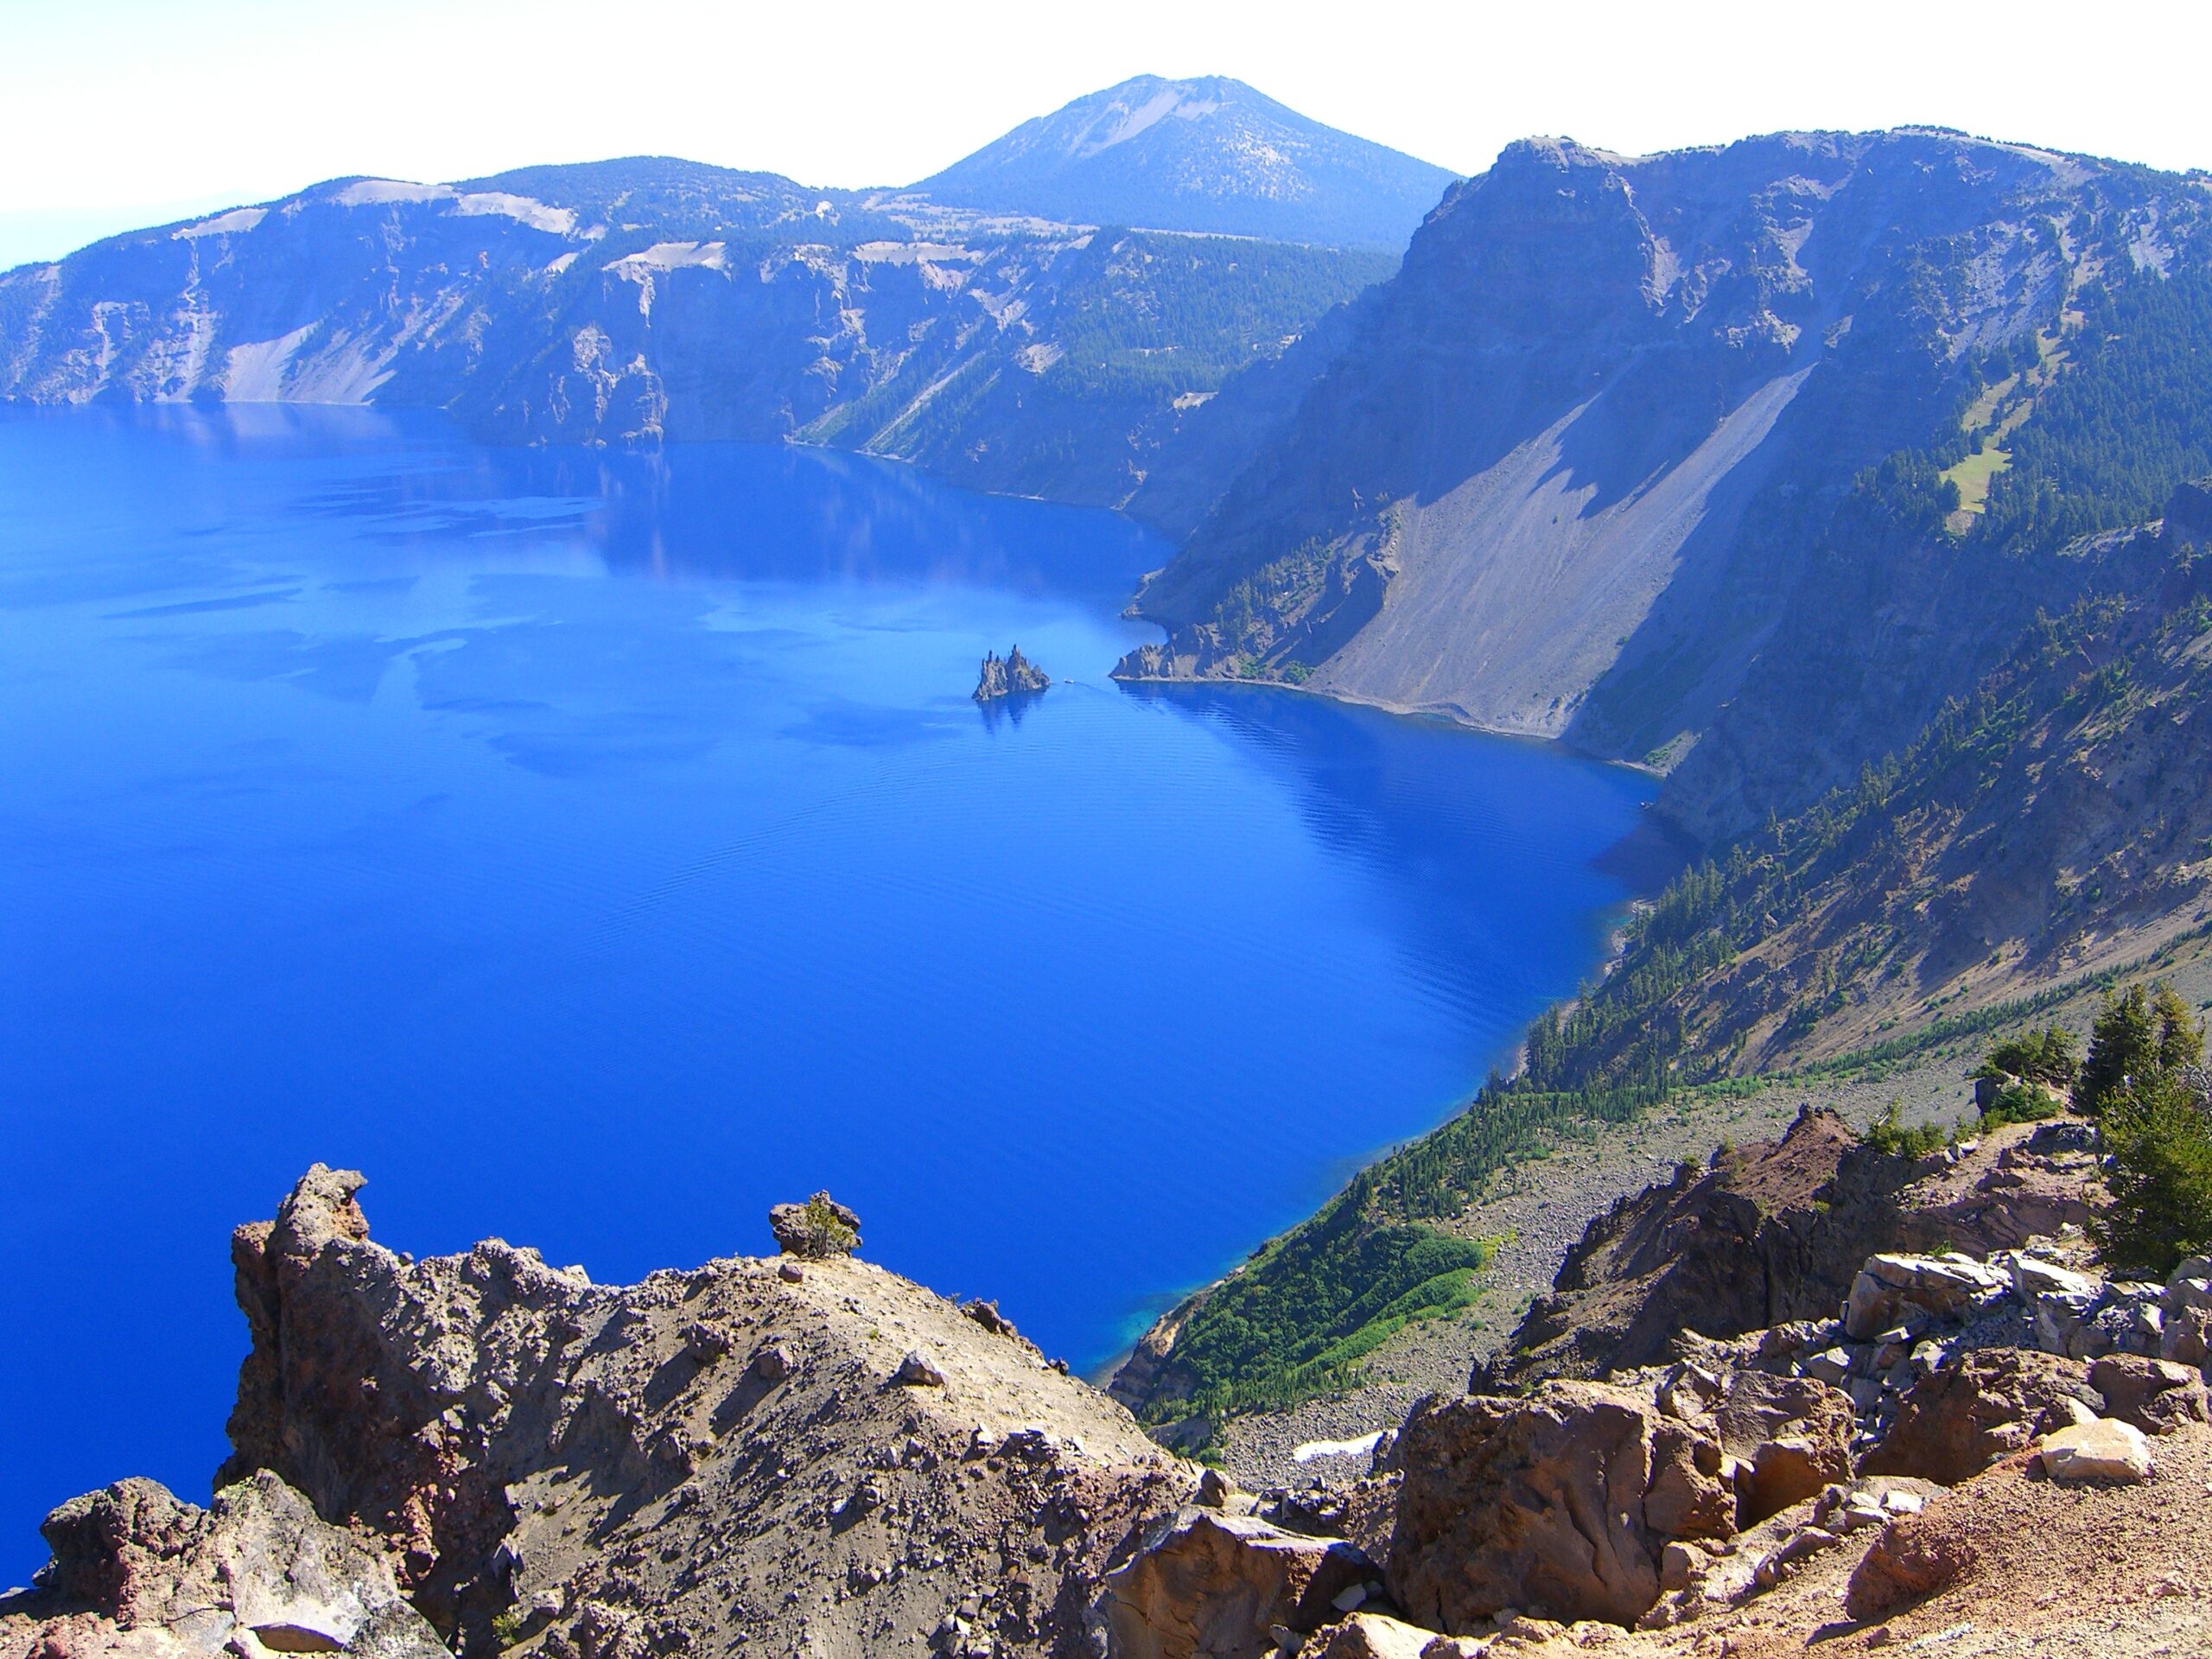 Crater Lake, in the Cascade Mountains in Southern Oregon, lies in a collapsed volcanic basin.